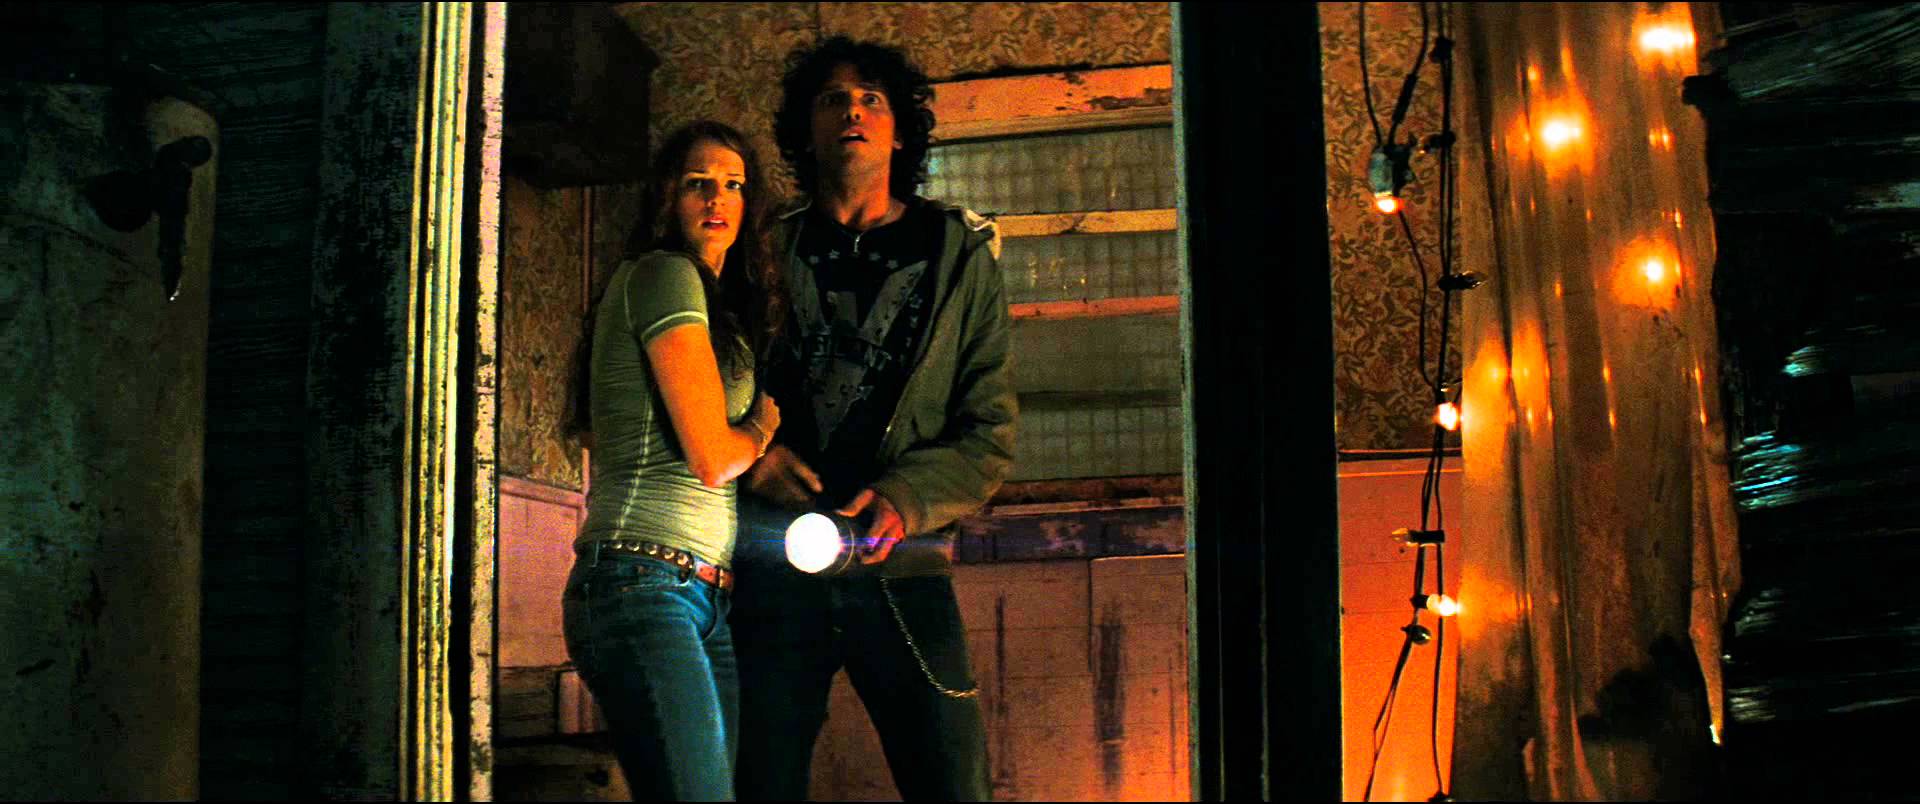 Friday The 13th (2009) Backgrounds, Compatible - PC, Mobile, Gadgets| 1920x804 px